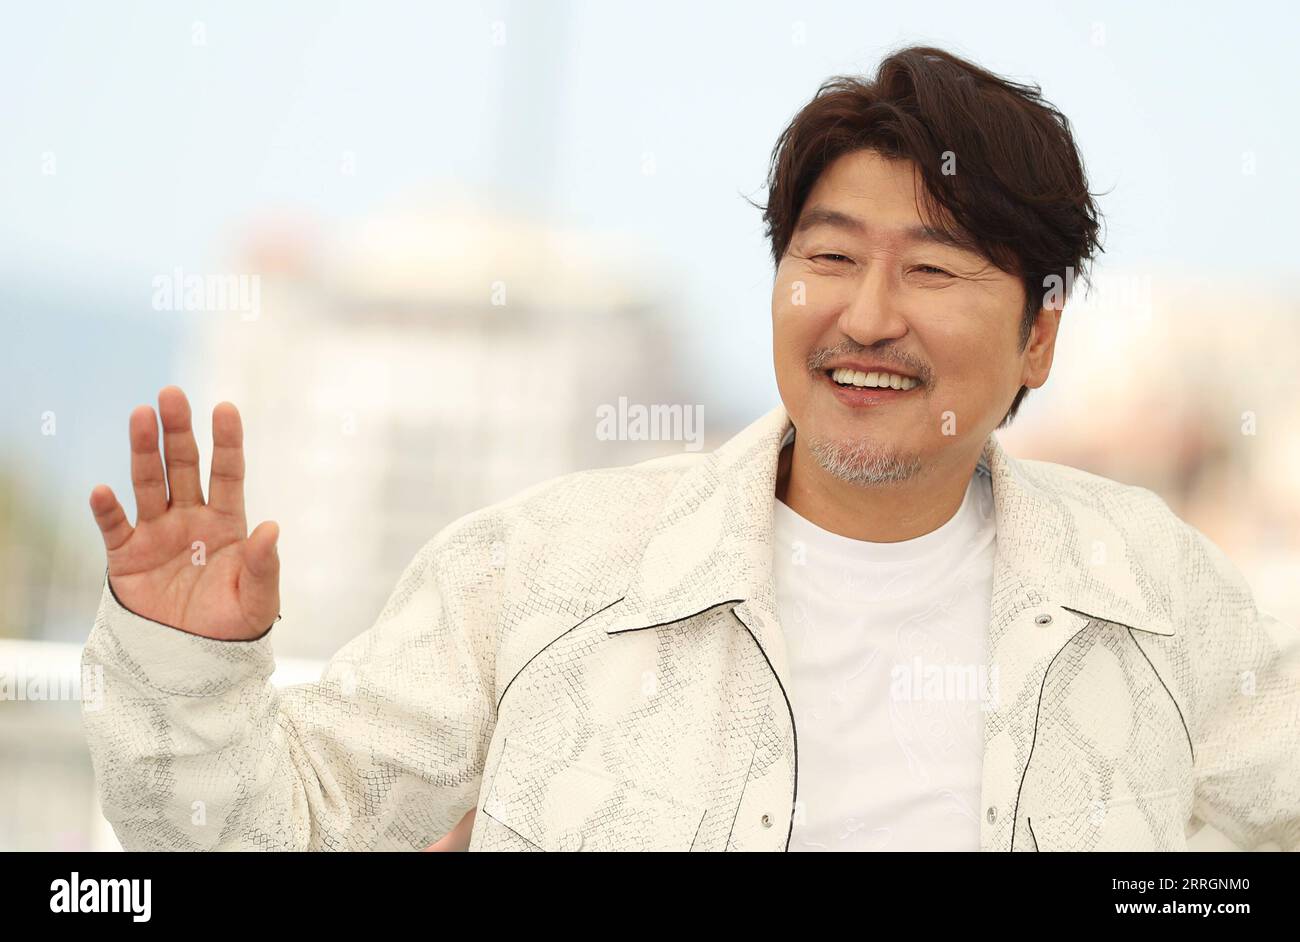 220527 -- CANNES, May 27, 2022 -- South Korean actor Song Kang-Ho poses during a photocall for the film Broker Les Bonnes Etoiles presented in the Official Competition at the 75th edition of the Cannes Film Festival in Cannes, southern France, on May 27, 2022.  FRANCE-CANNES-PHOTOCALL-BROKER GaoxJing PUBLICATIONxNOTxINxCHN Stock Photo